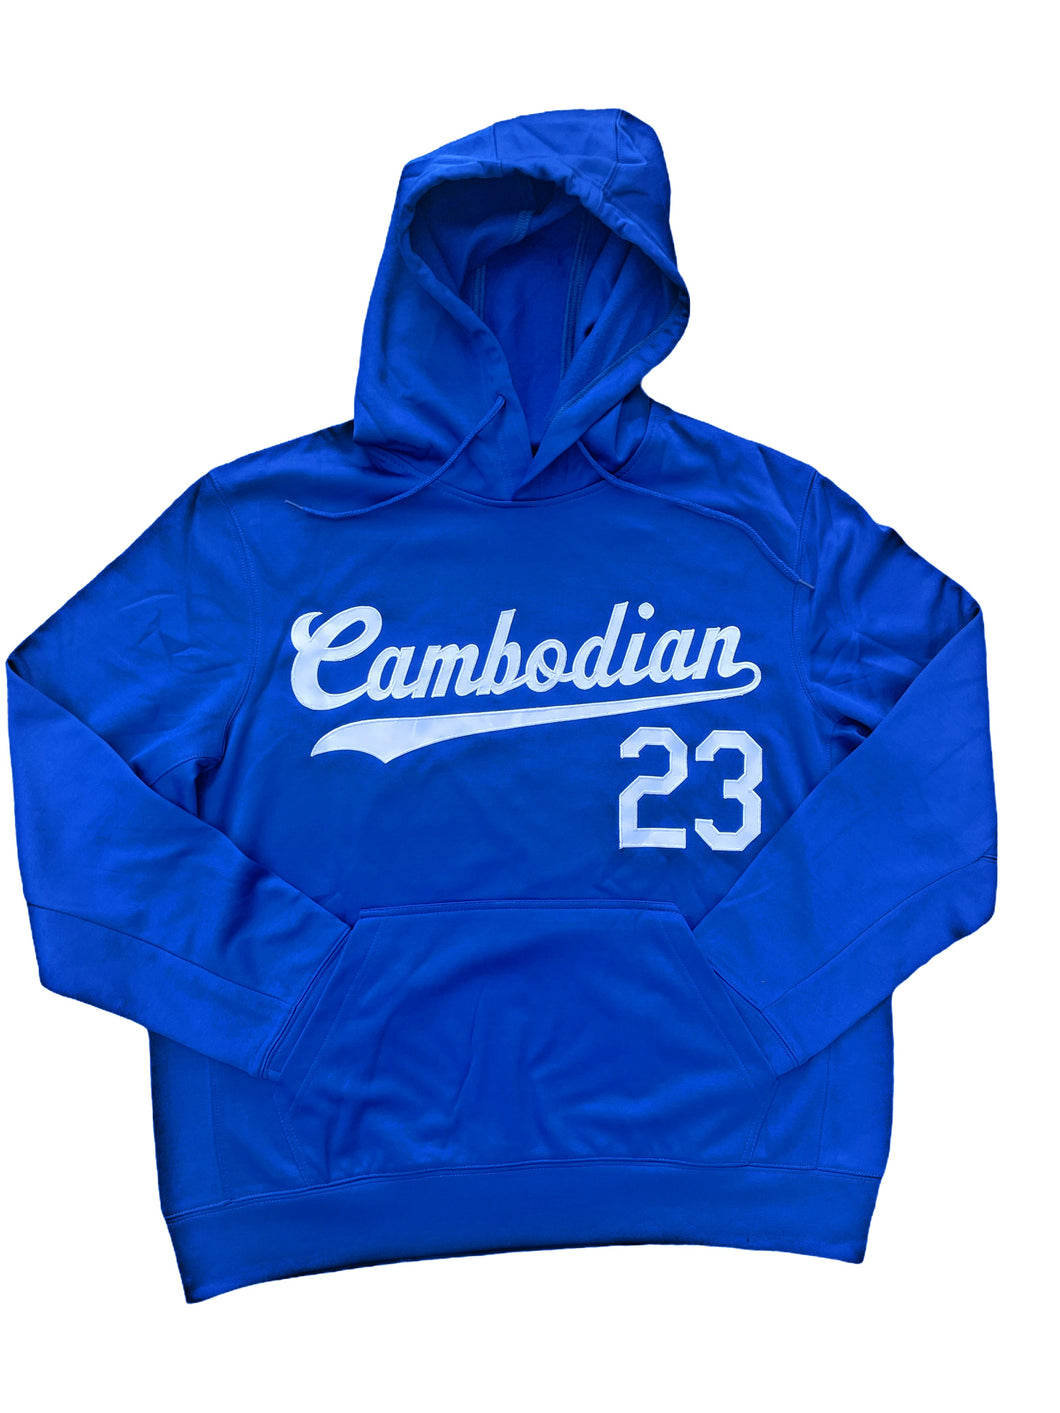 Cambodian Jersey Hoodie